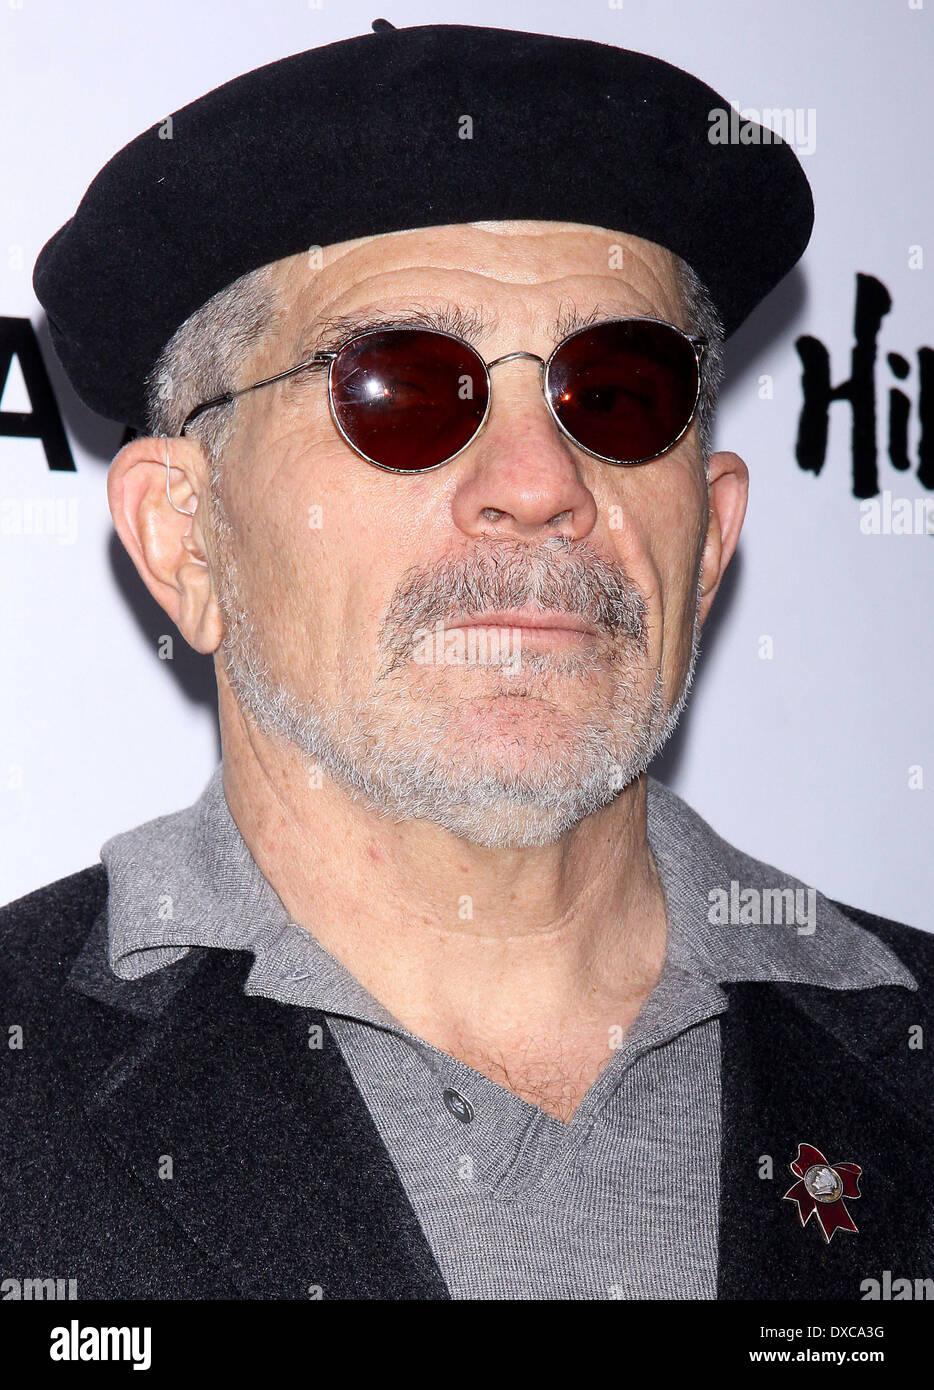 David Mamet at the Broadway opening night of 'The Anarchist' at the Golden Theatre - Arrivals. Featuring: David Mamet at the Br Stock Photo